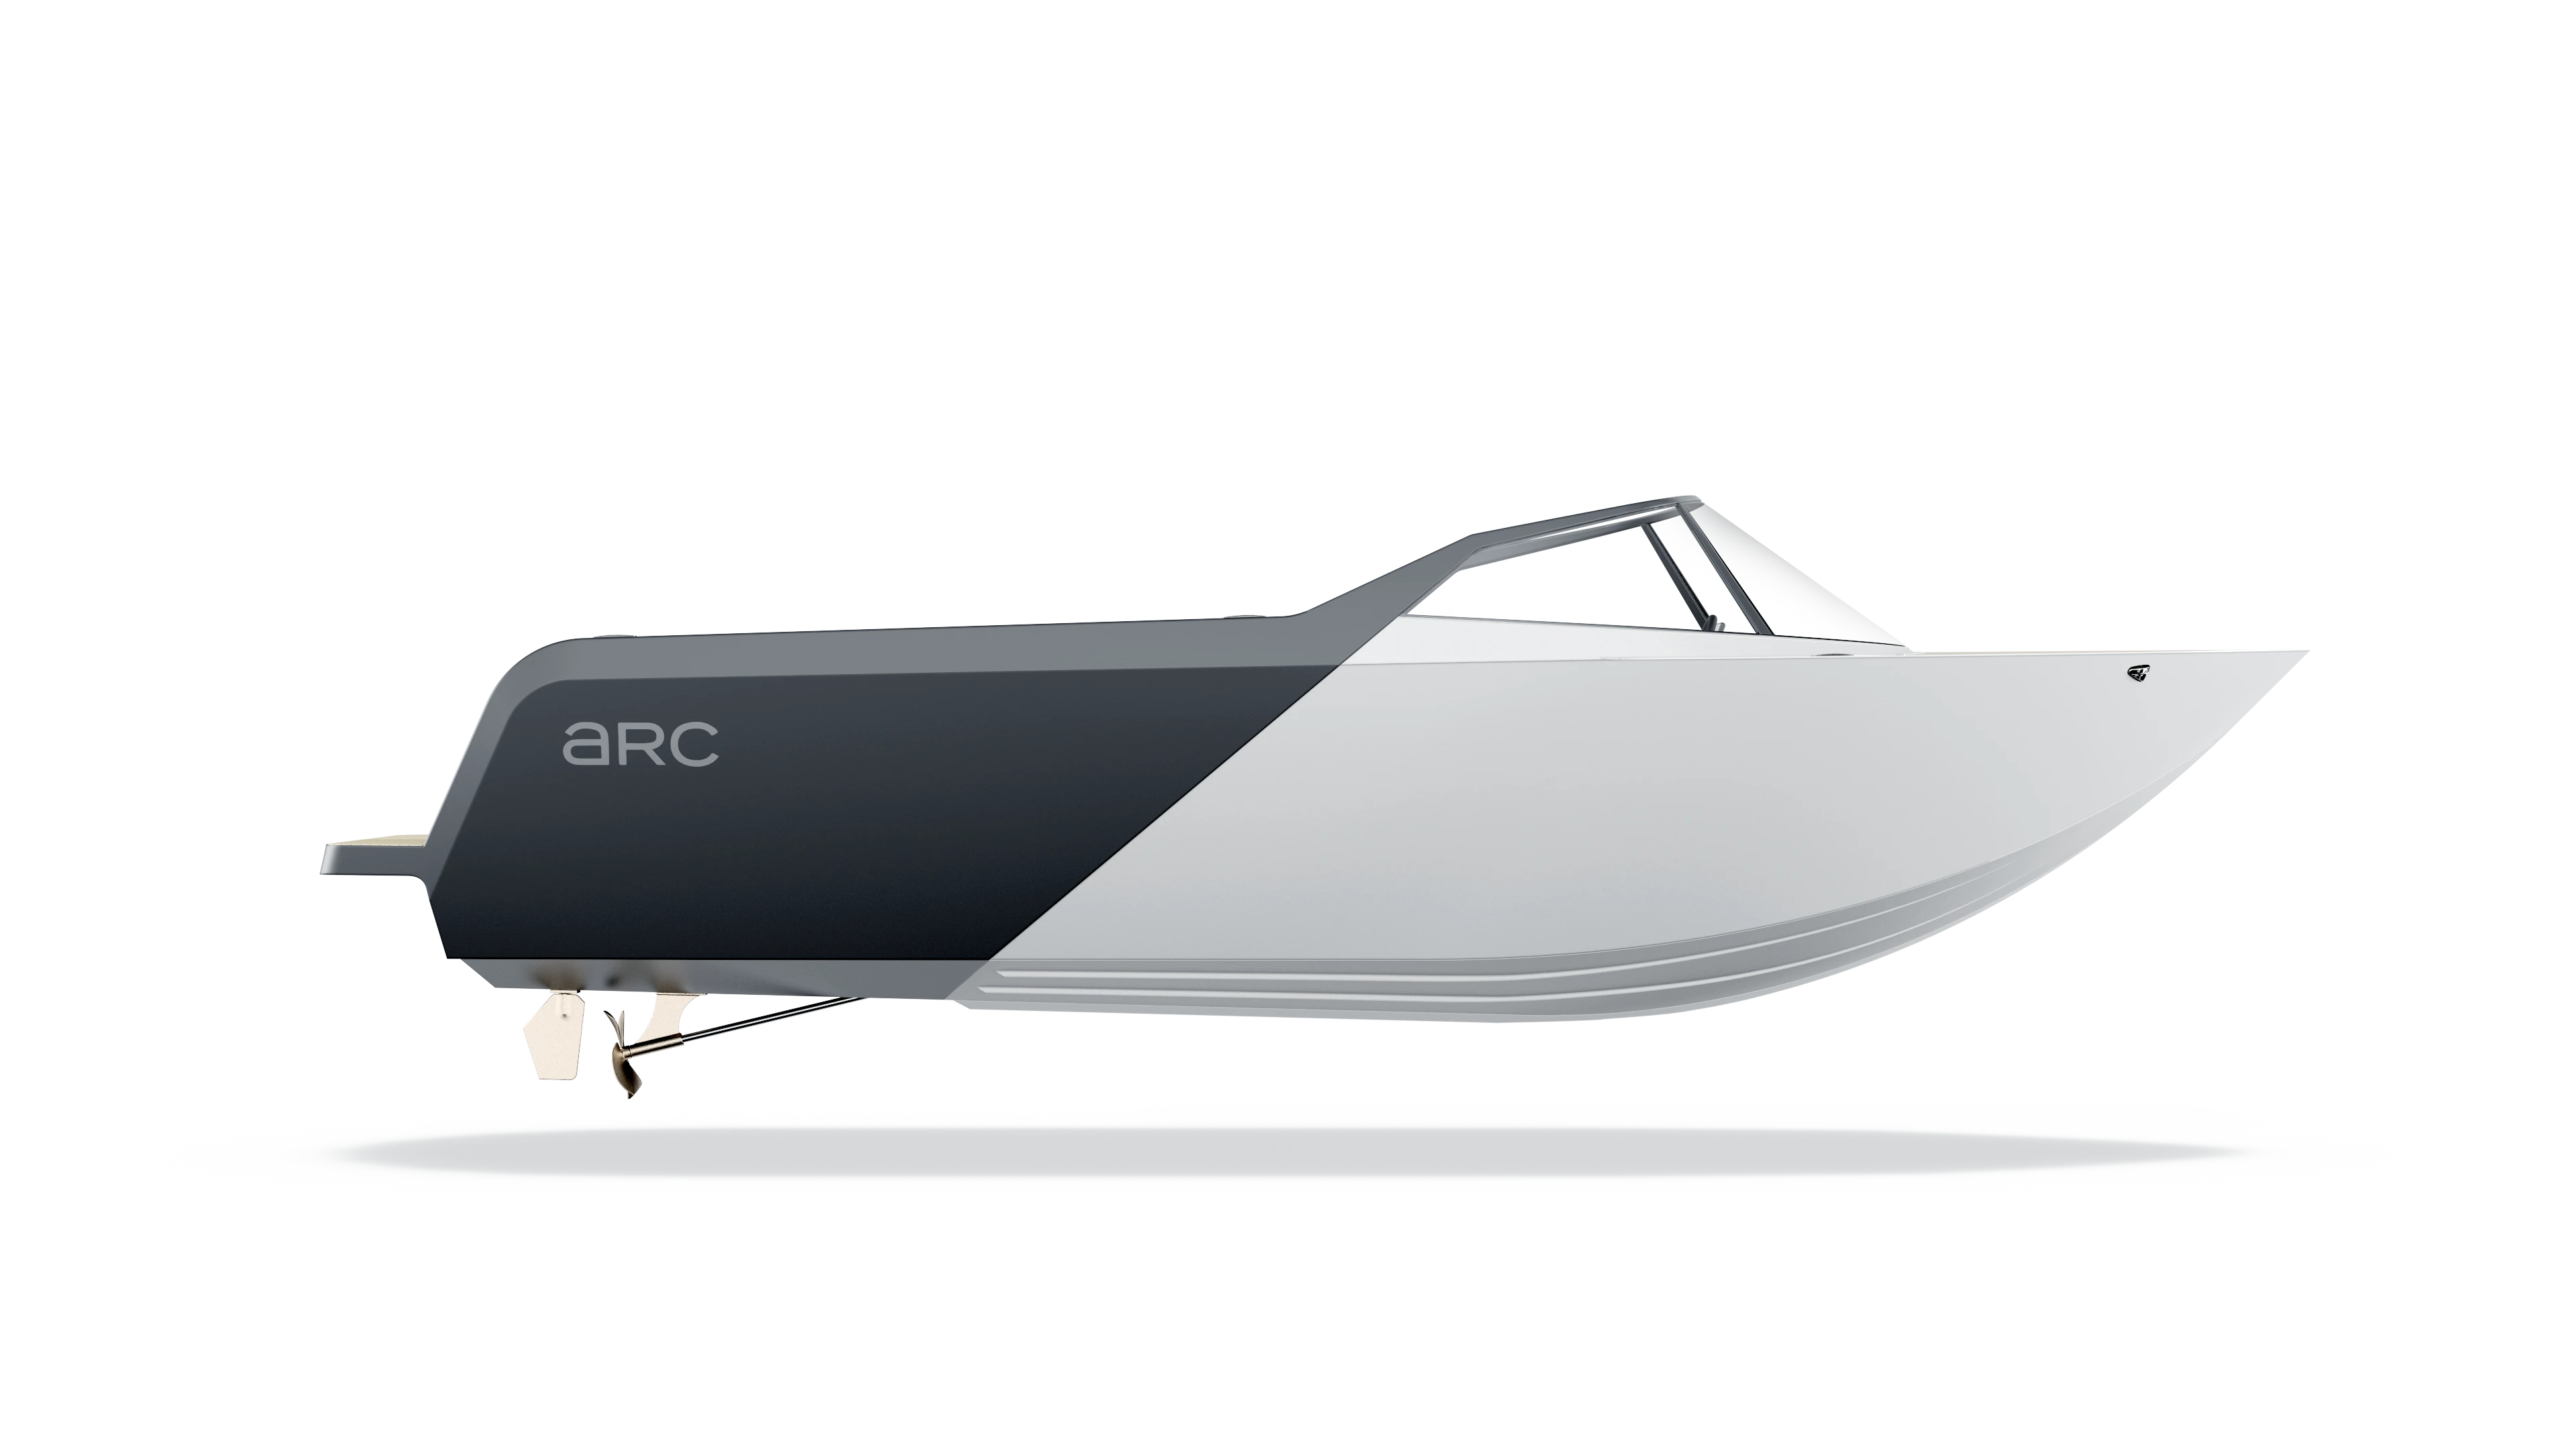 A 3D rendering of the Arc One showing the full boat out of the water from the starboard side including the propeller